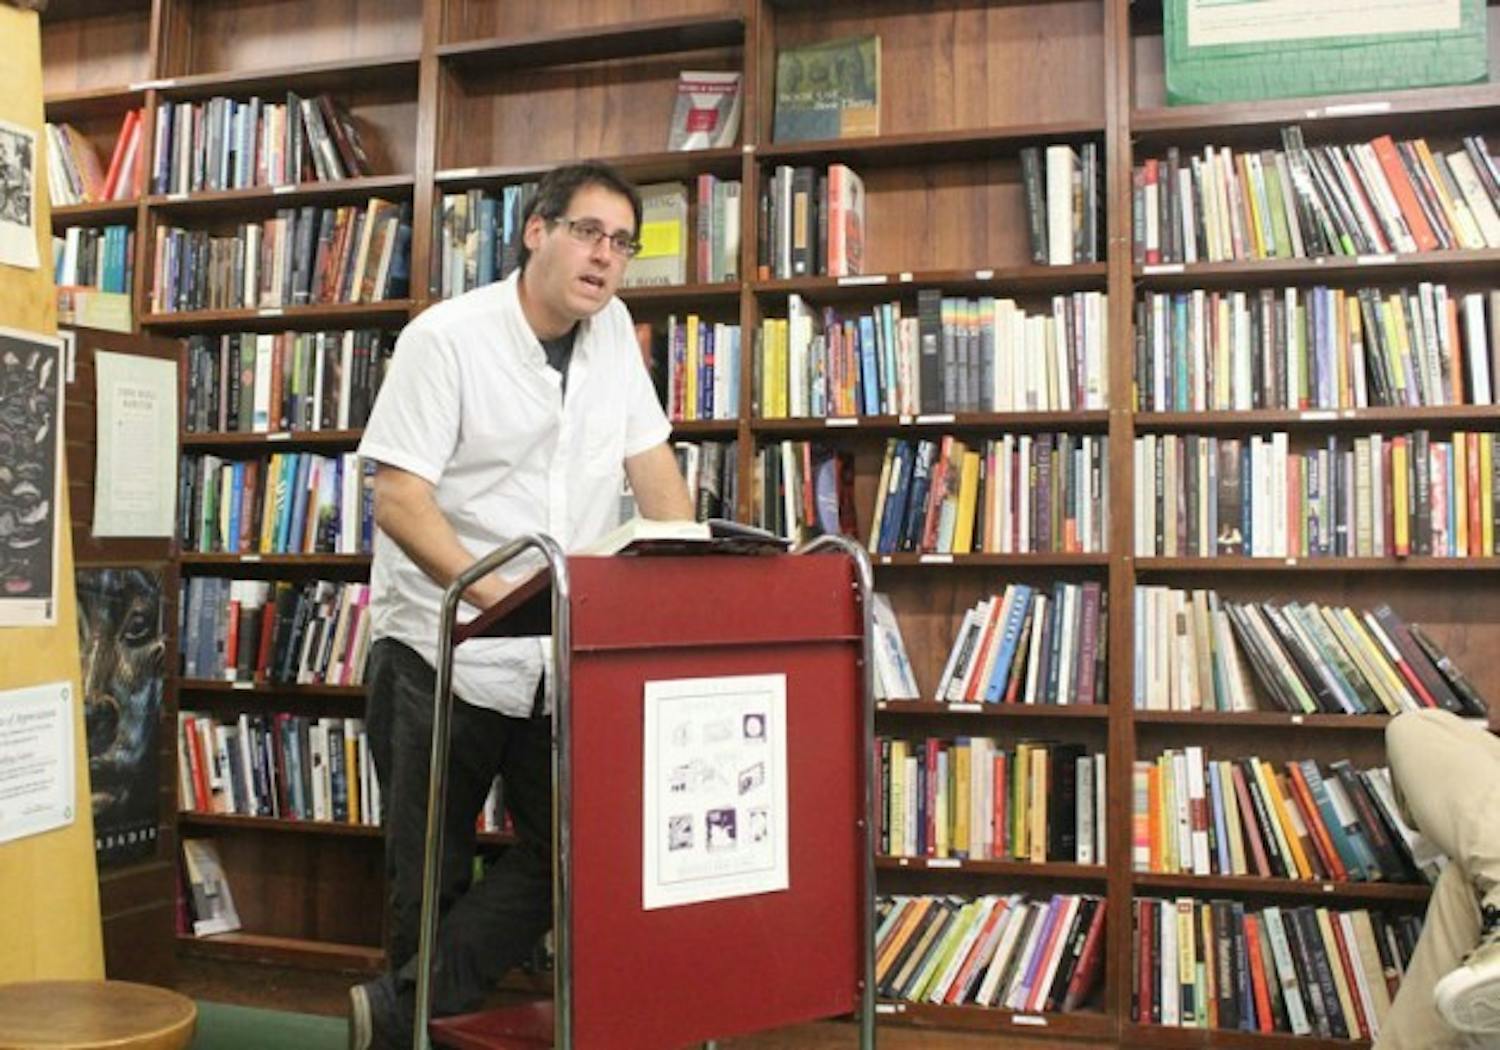 On Tuesday at Talking Leaves, University of Rochester professor Steven Schottenfeld read from his book &ldquo;Bluff City Pawn.&rdquo; The book follows the tribulations of a Memphis city pawn shop owner.&nbsp;Cletus Emokpae, The Spectrum